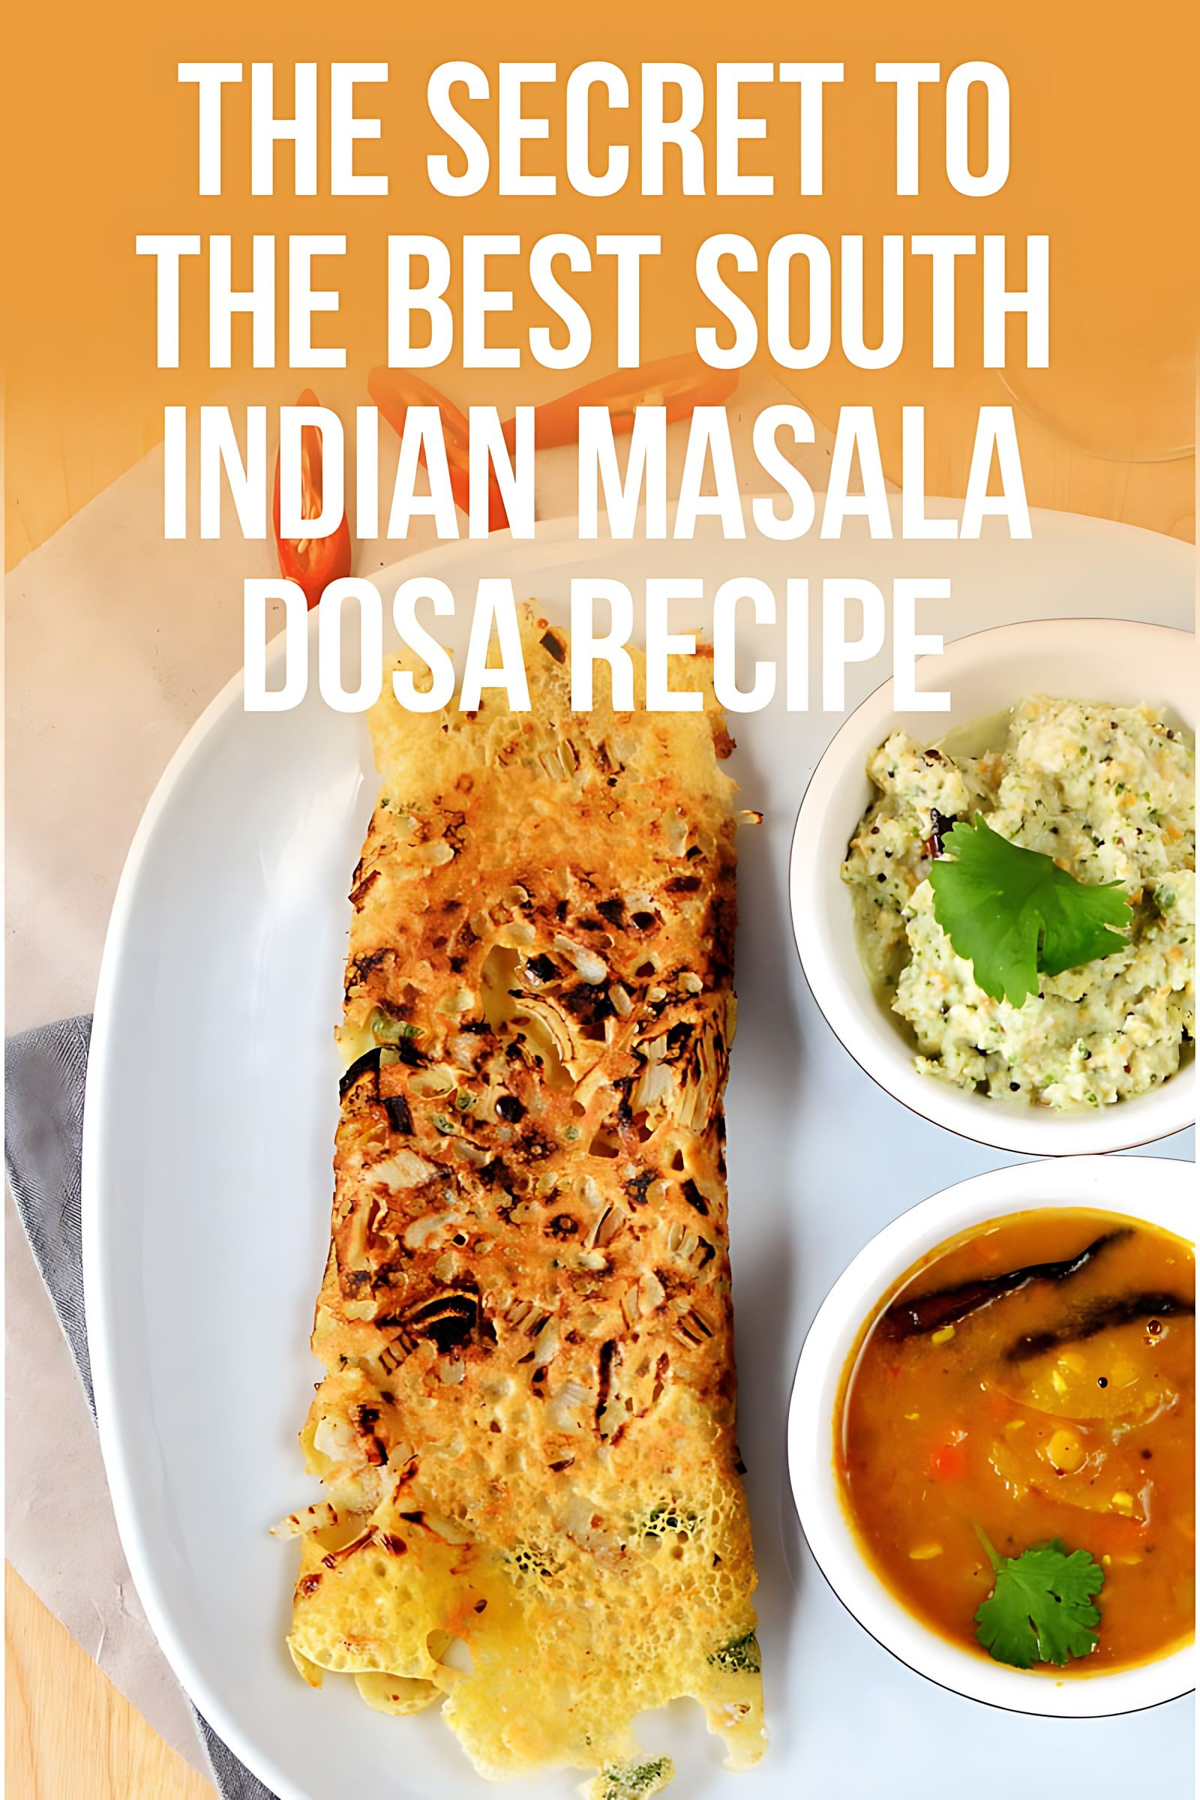 The Secret to the Best South Indian Masala Dosa Recipe